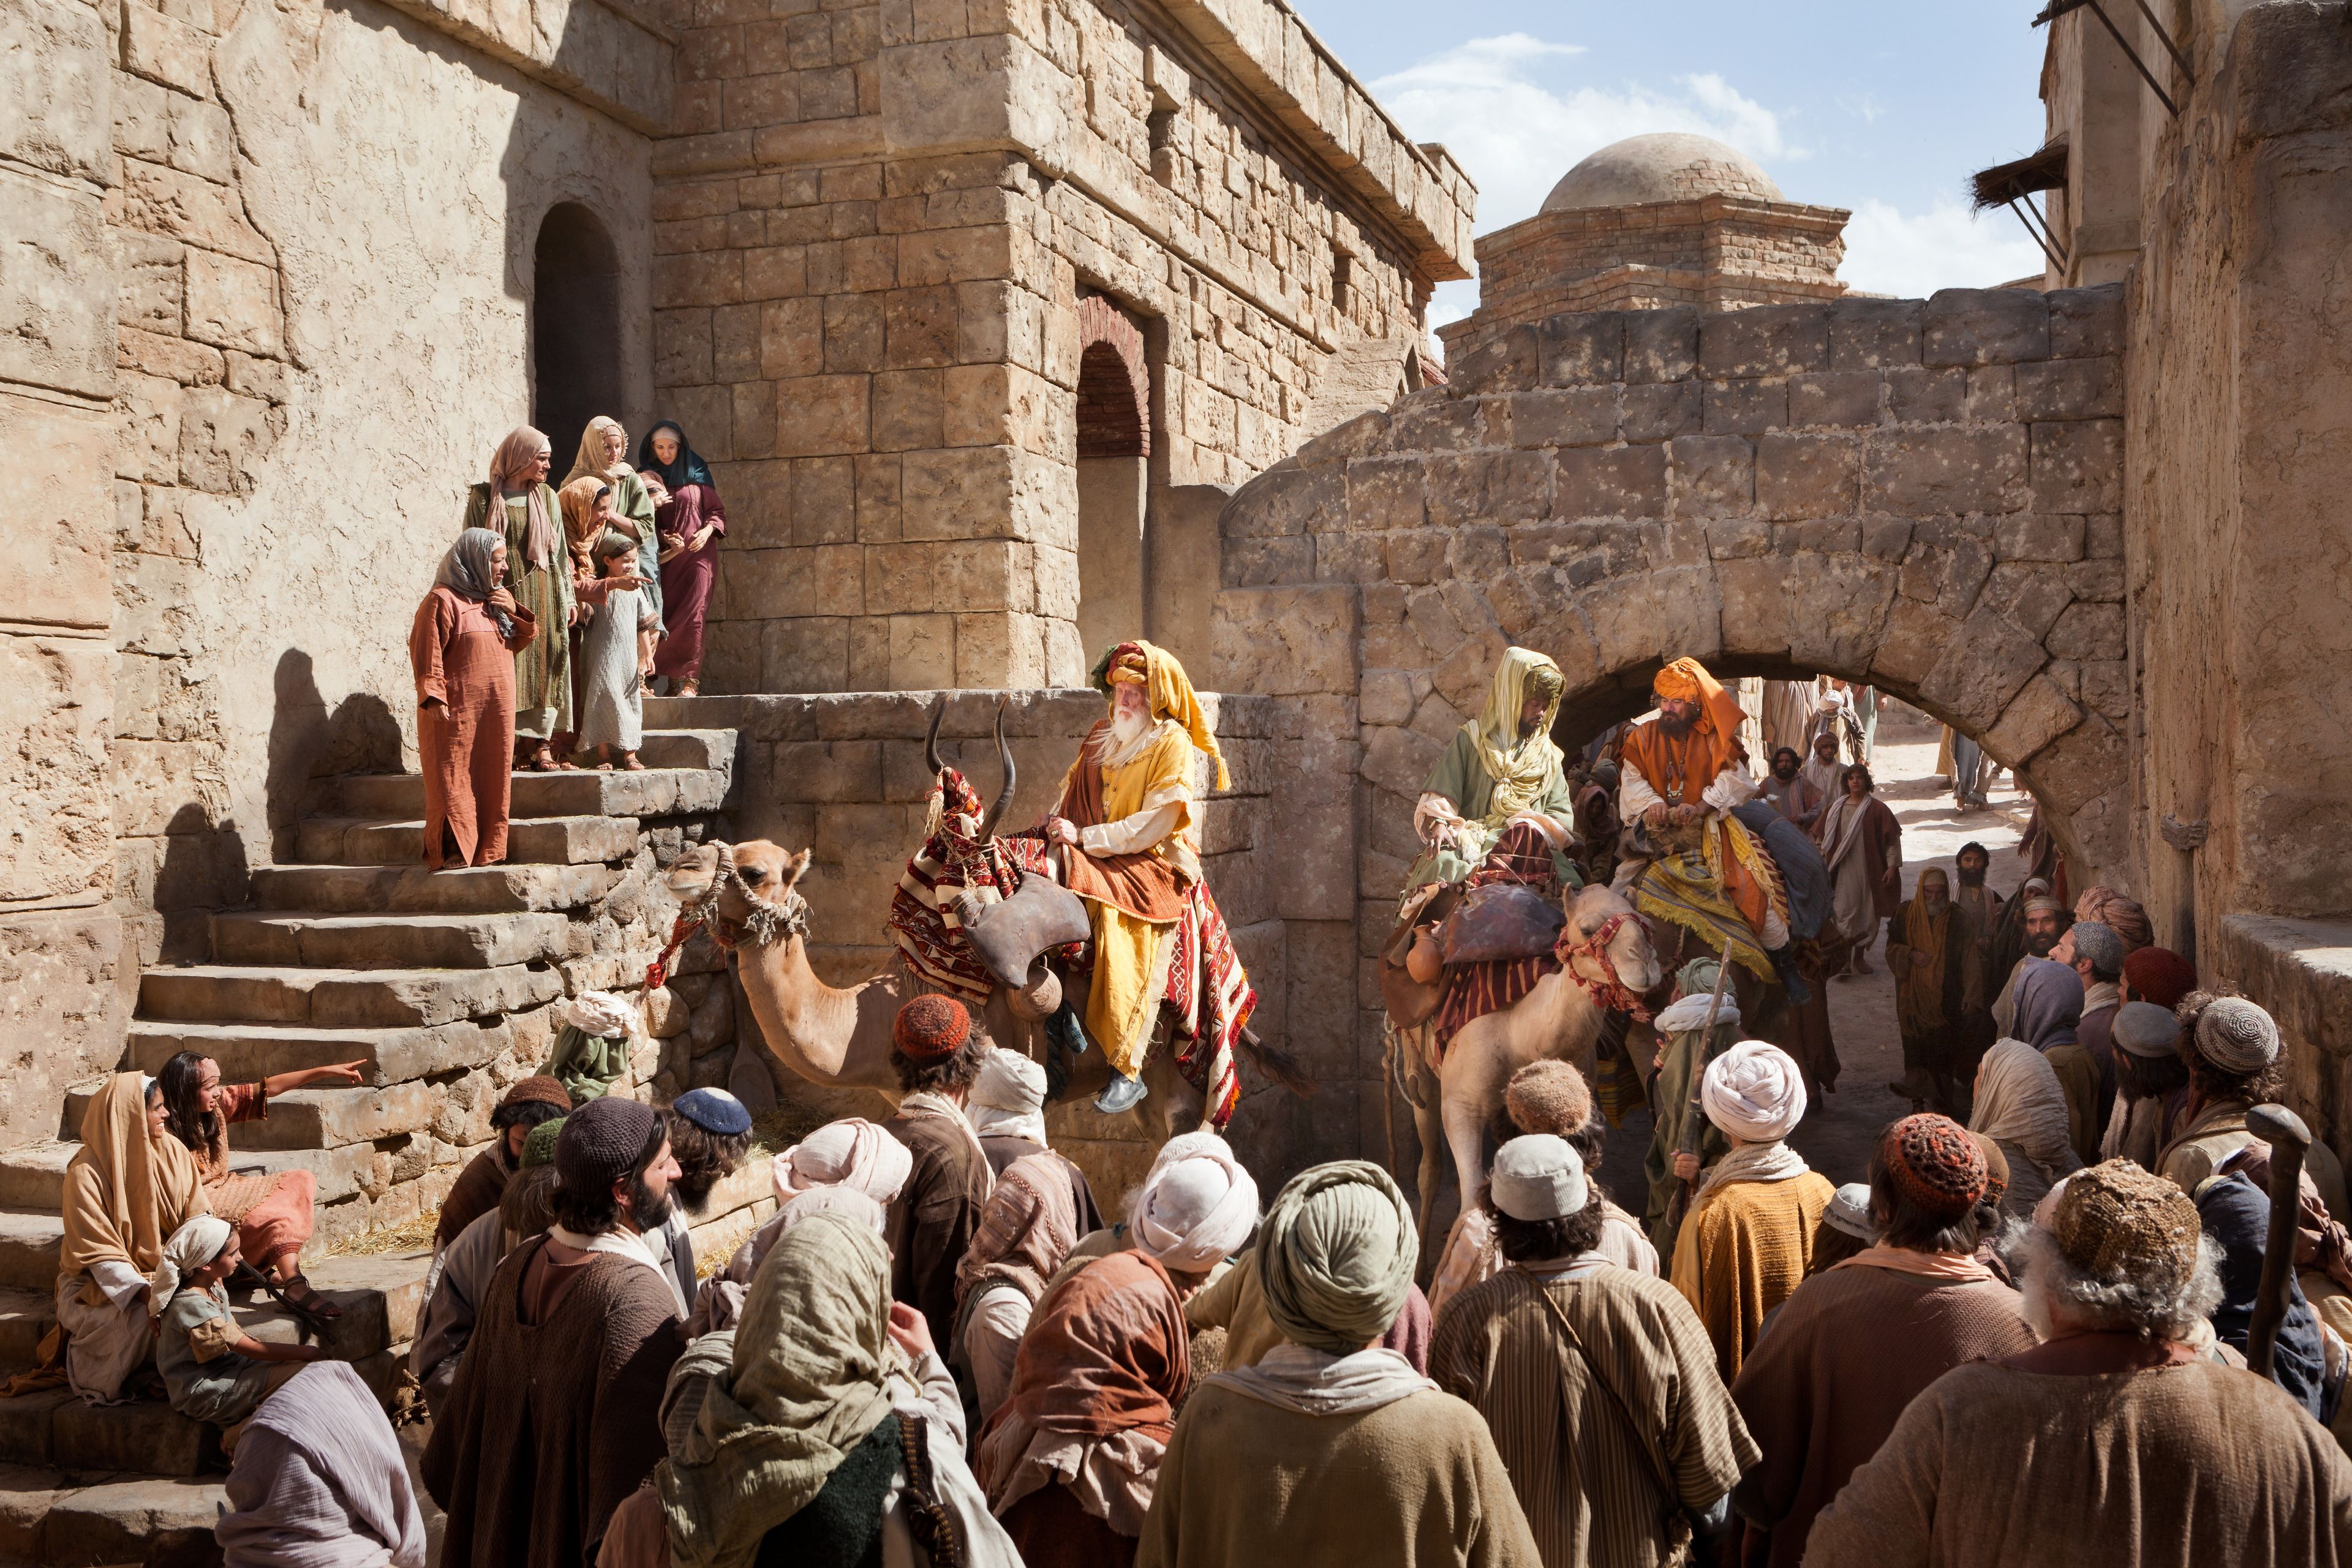 The Wise Men make their way through a crowd of people to give their gifts to the Christ child.